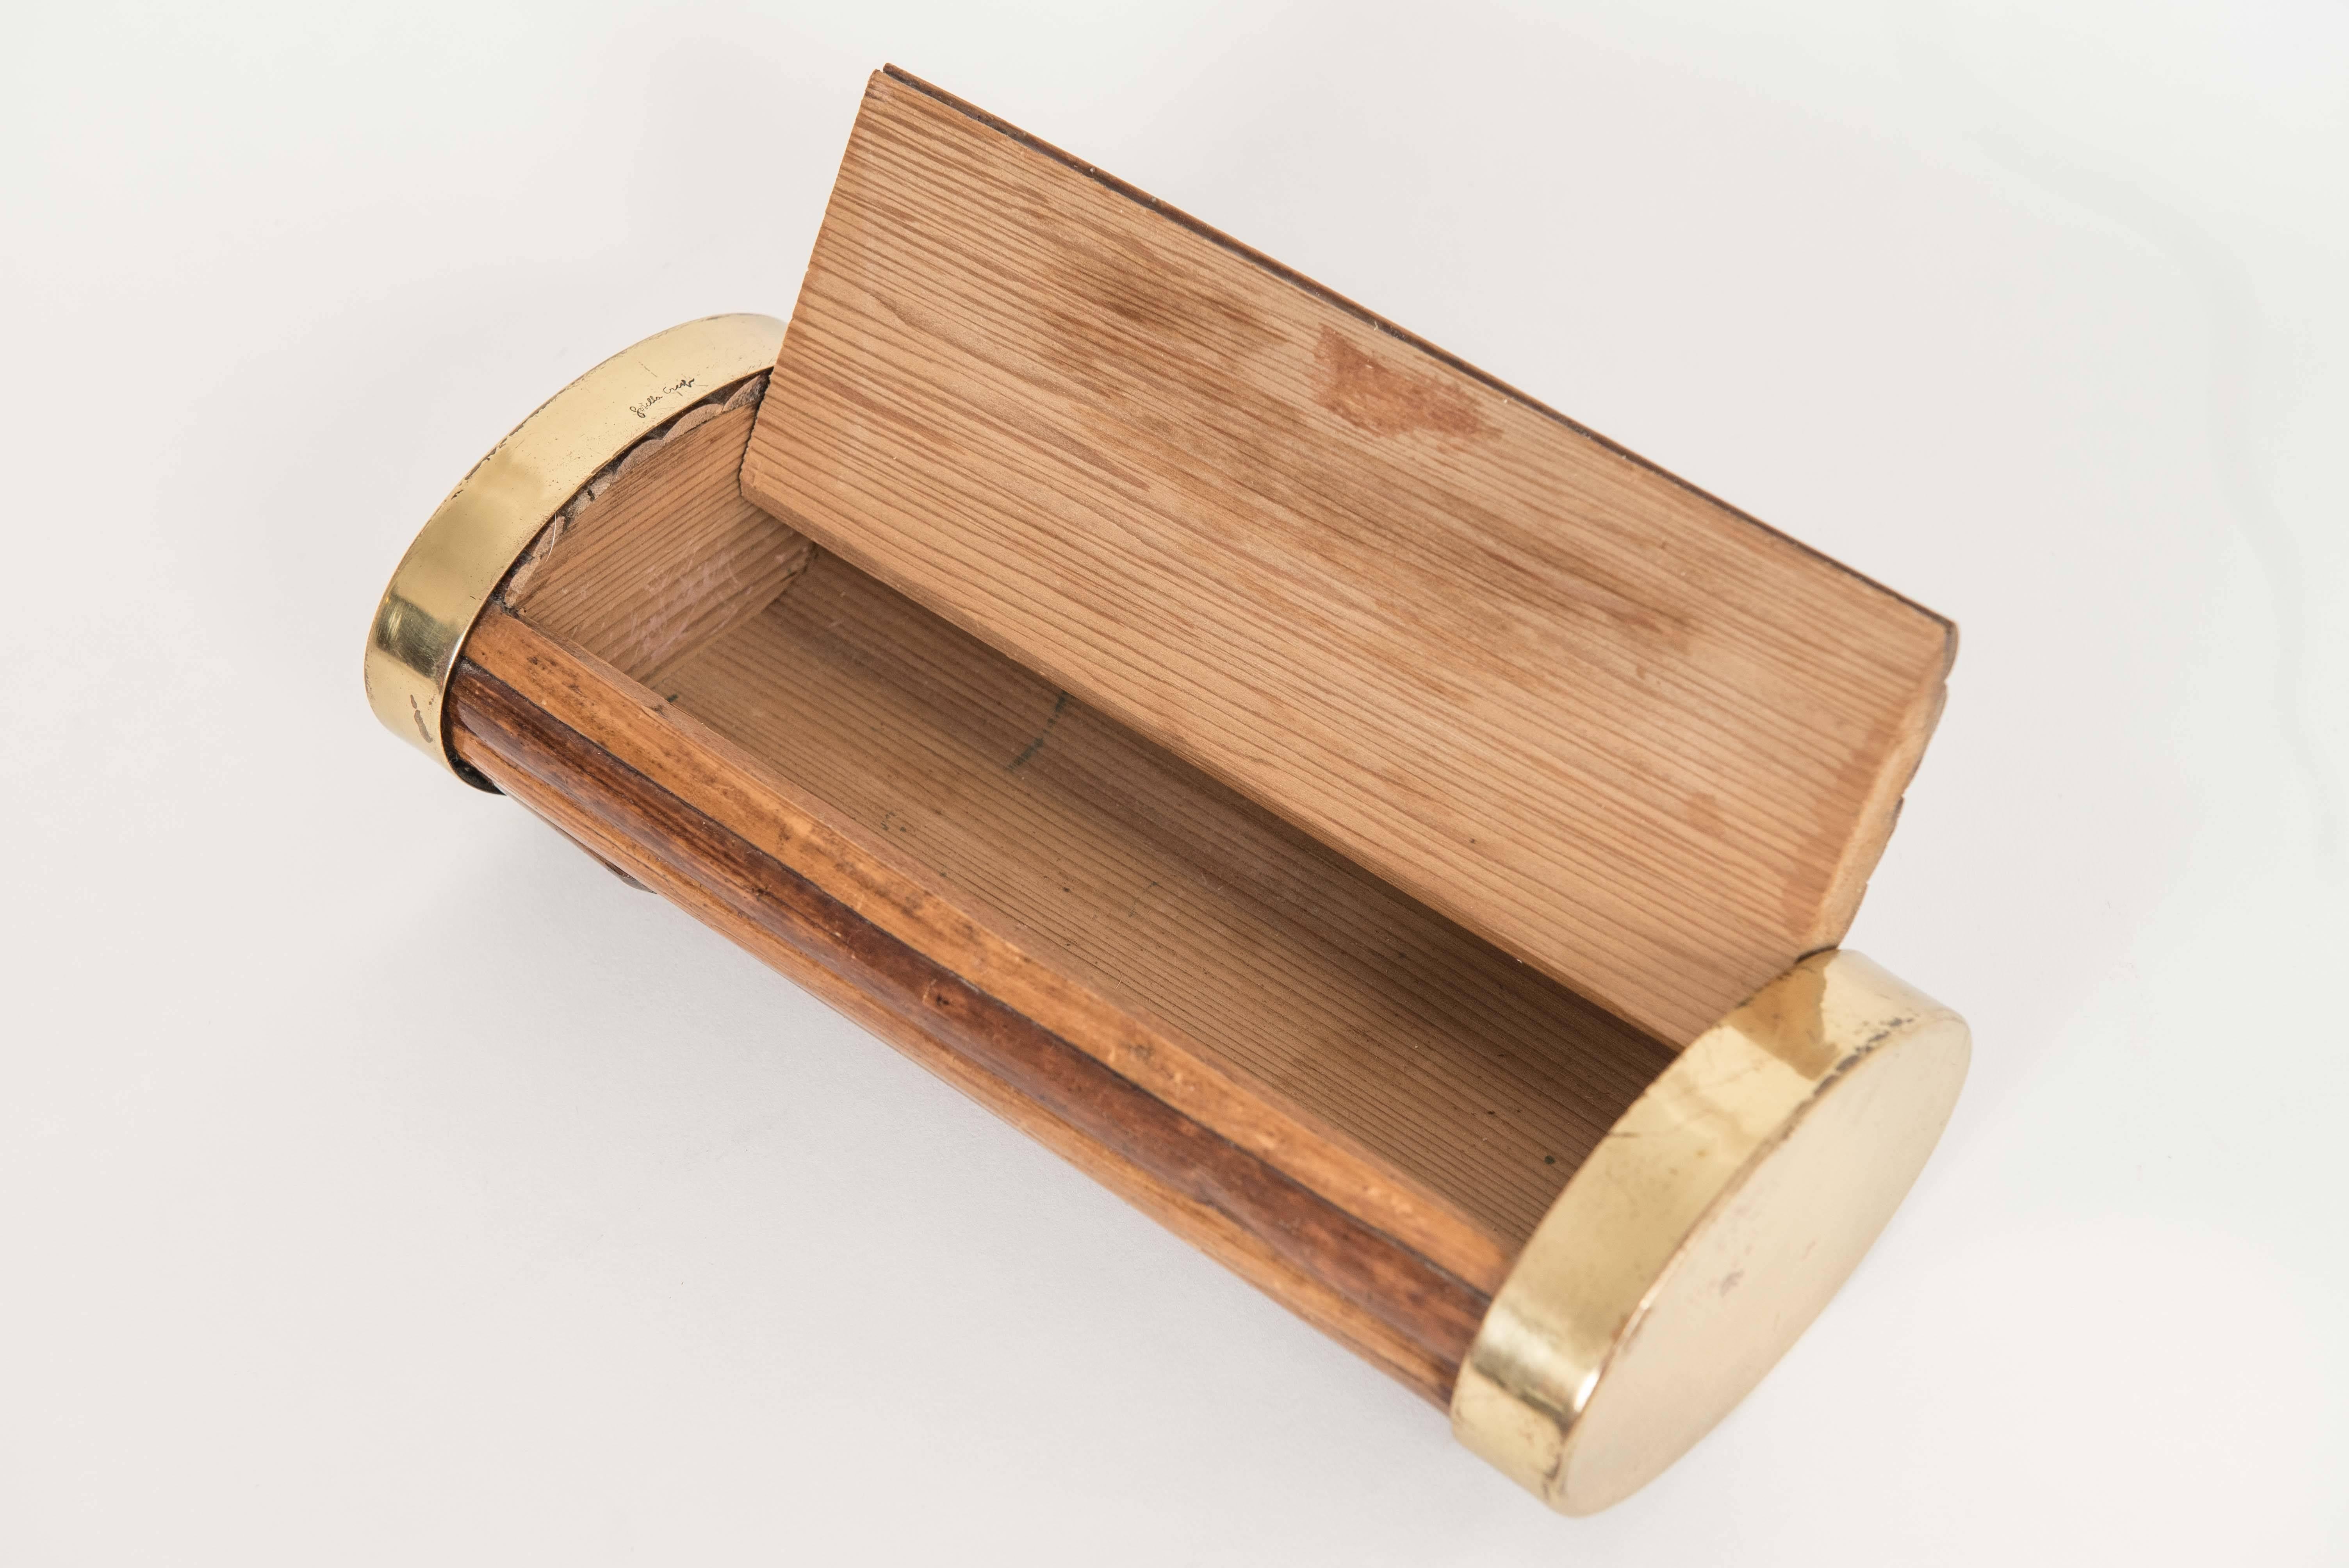 Oval section bamboo and brass box with applied shield at the center. Interior lined with cedar wood. Engraved signature.